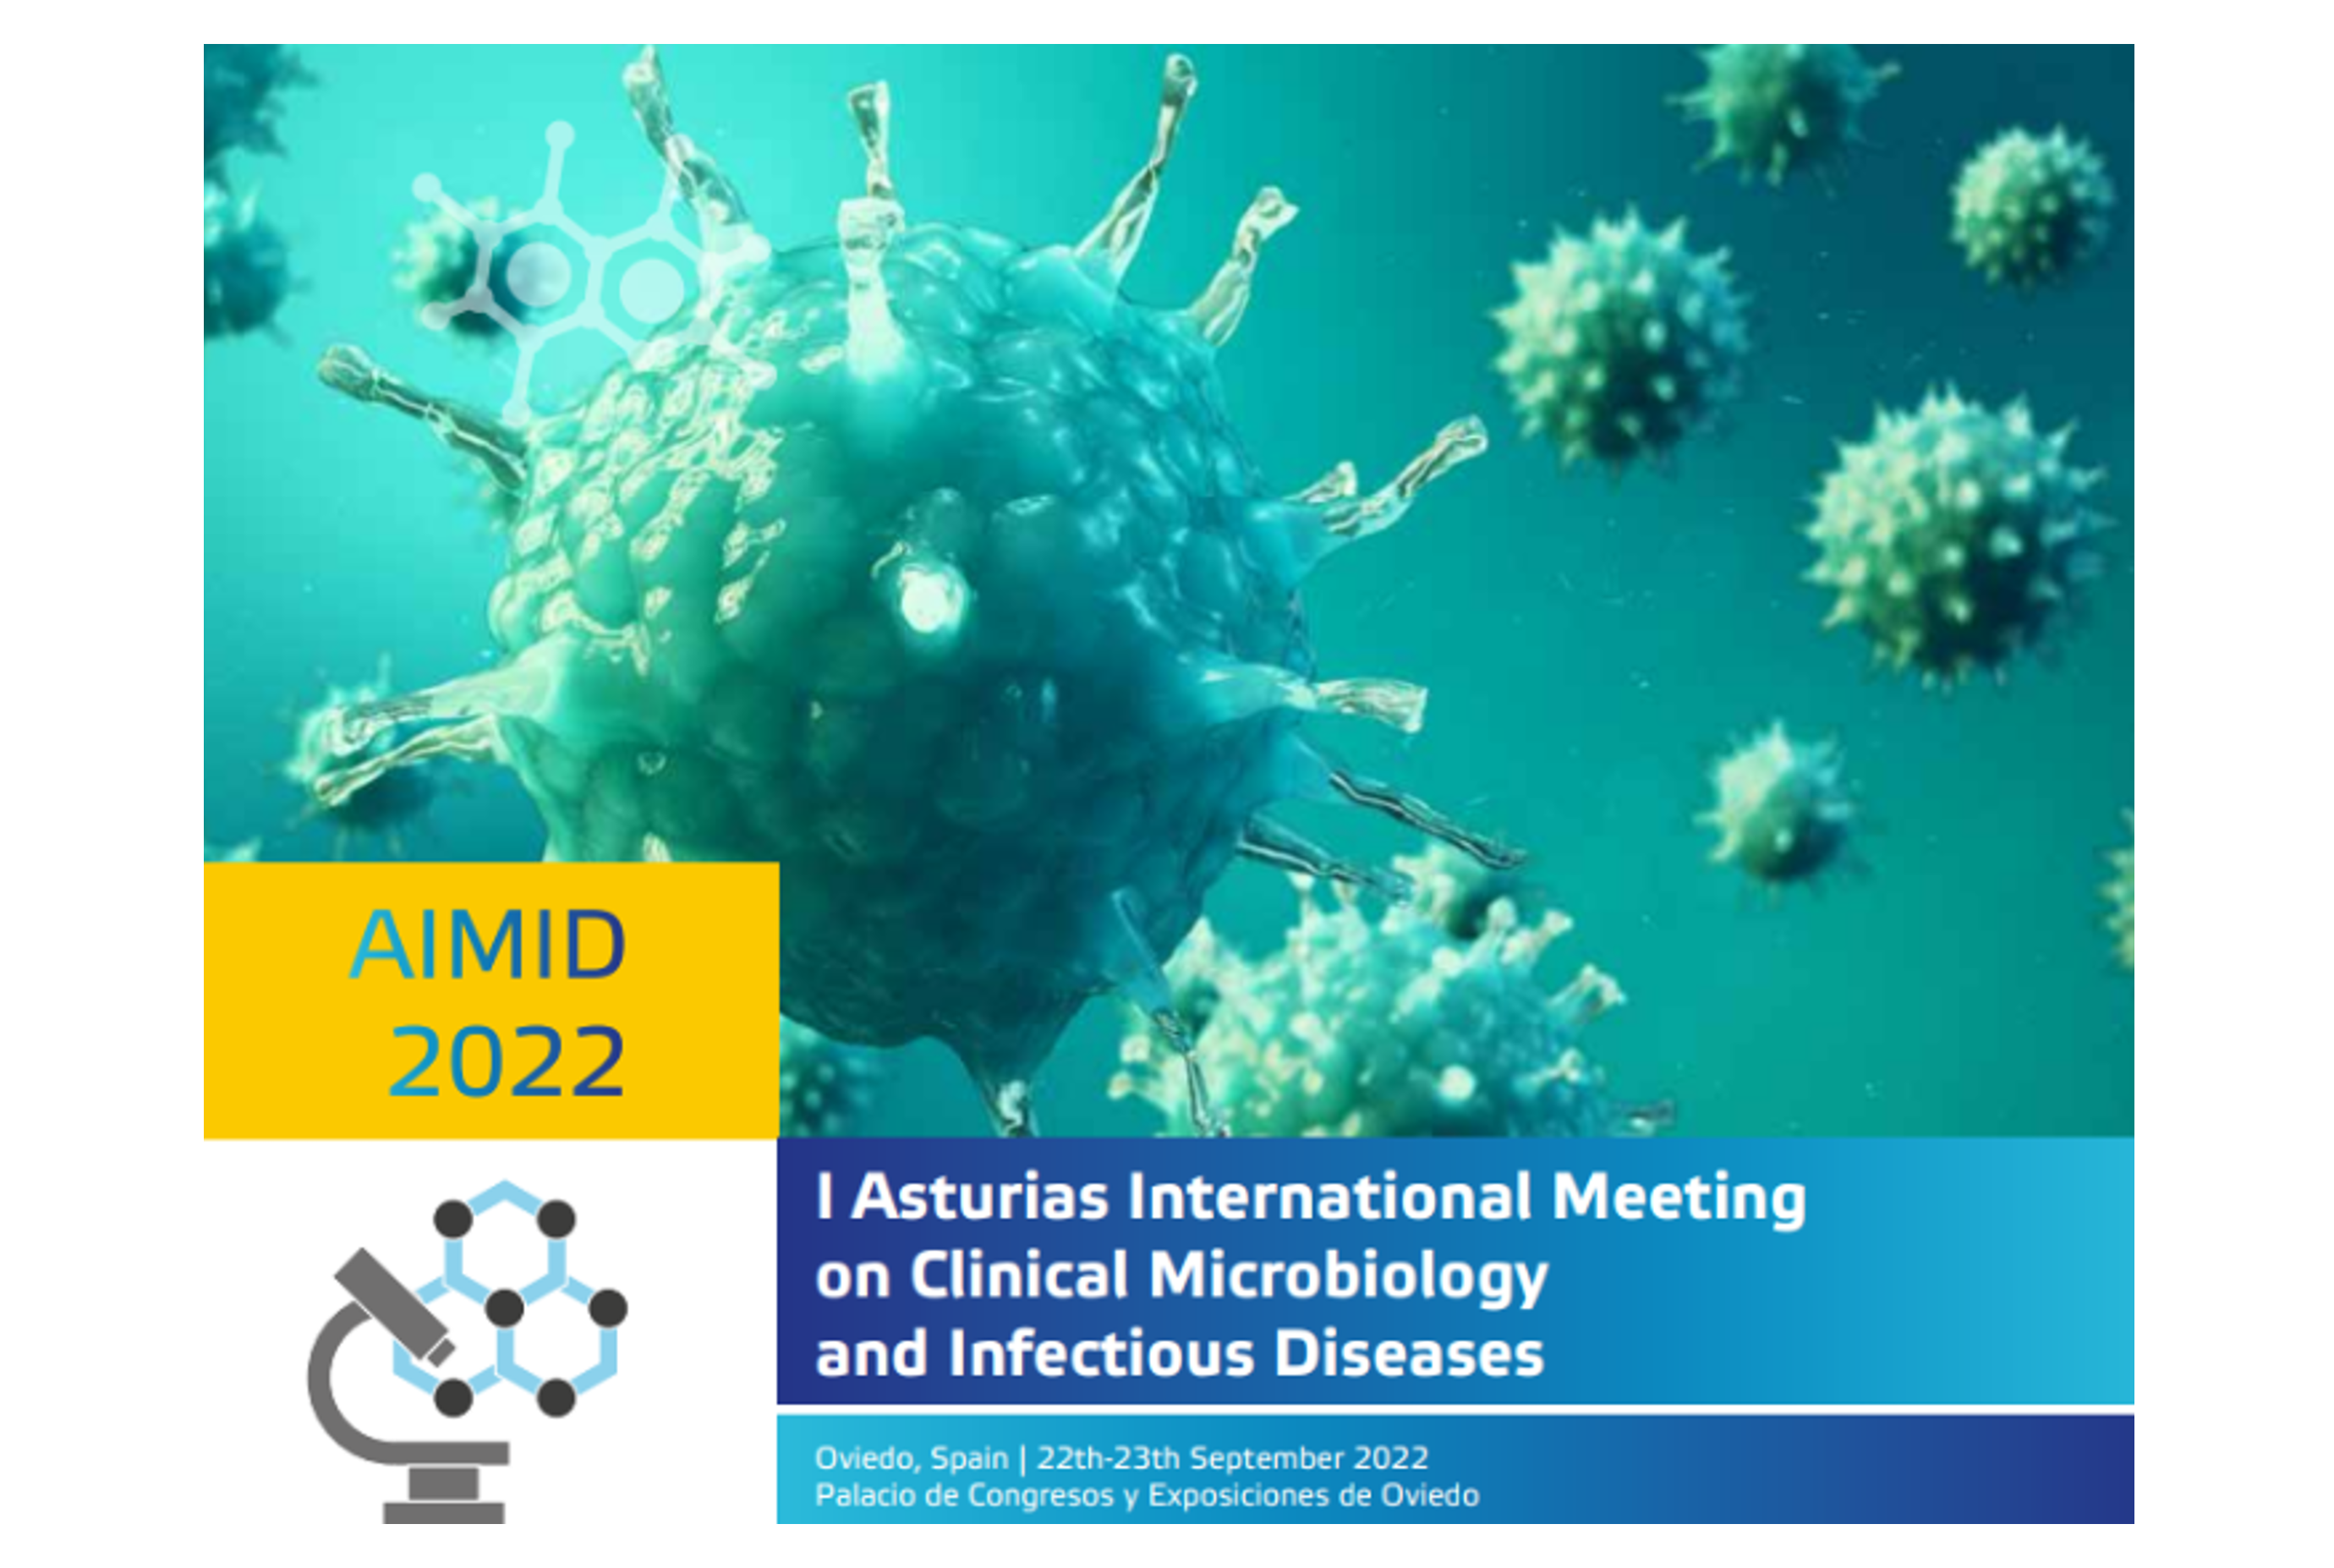 Microviable will be attending AIMID 2022 (I Asturias International Meeting on Clinical Microbiology and Infectious Disease).